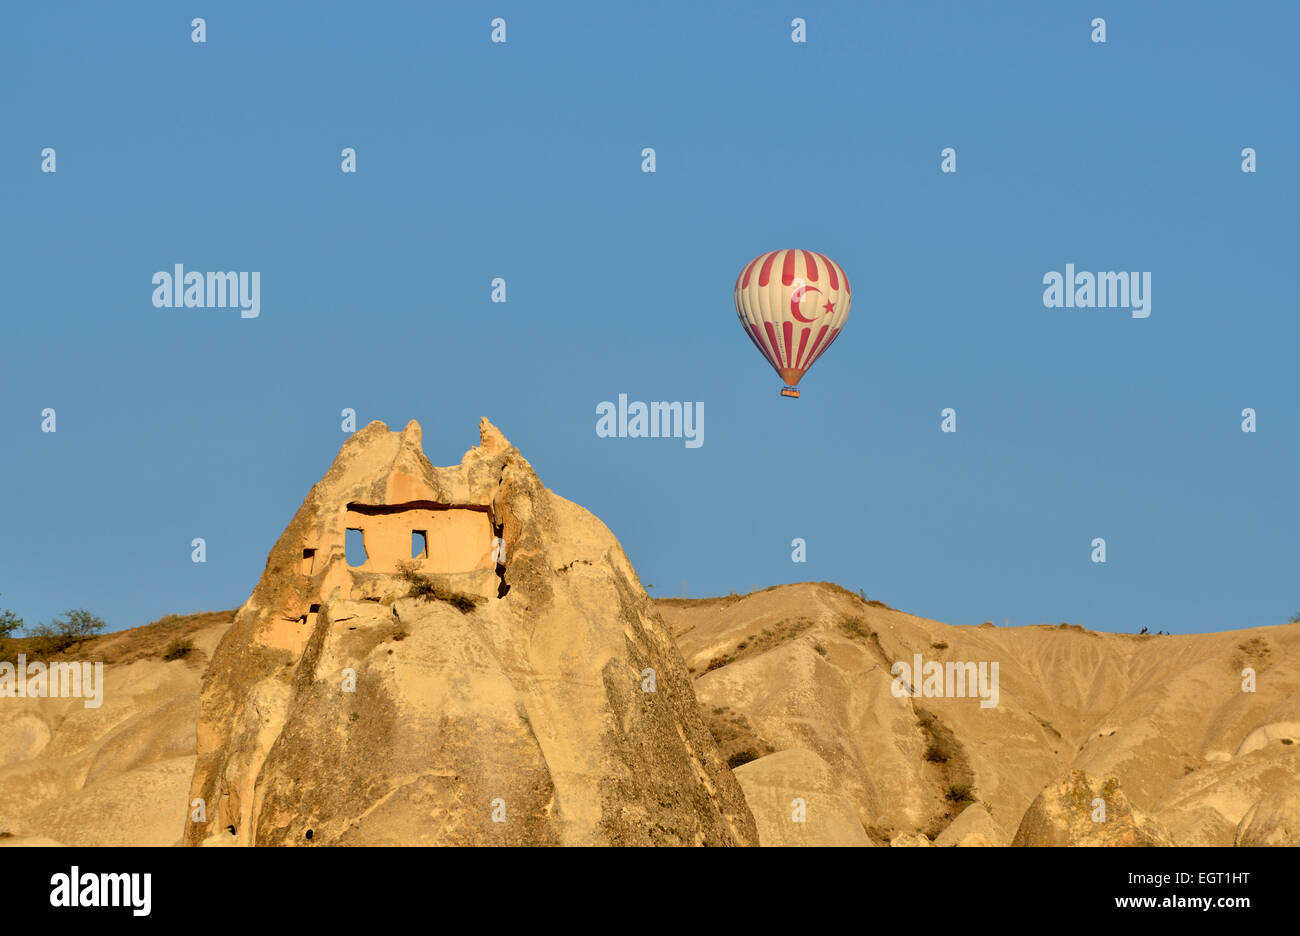 Hot air balloon flying over tufa rock formations and ancient cave dwellings, Goreme, Cappadocia, Turkey Stock Photo